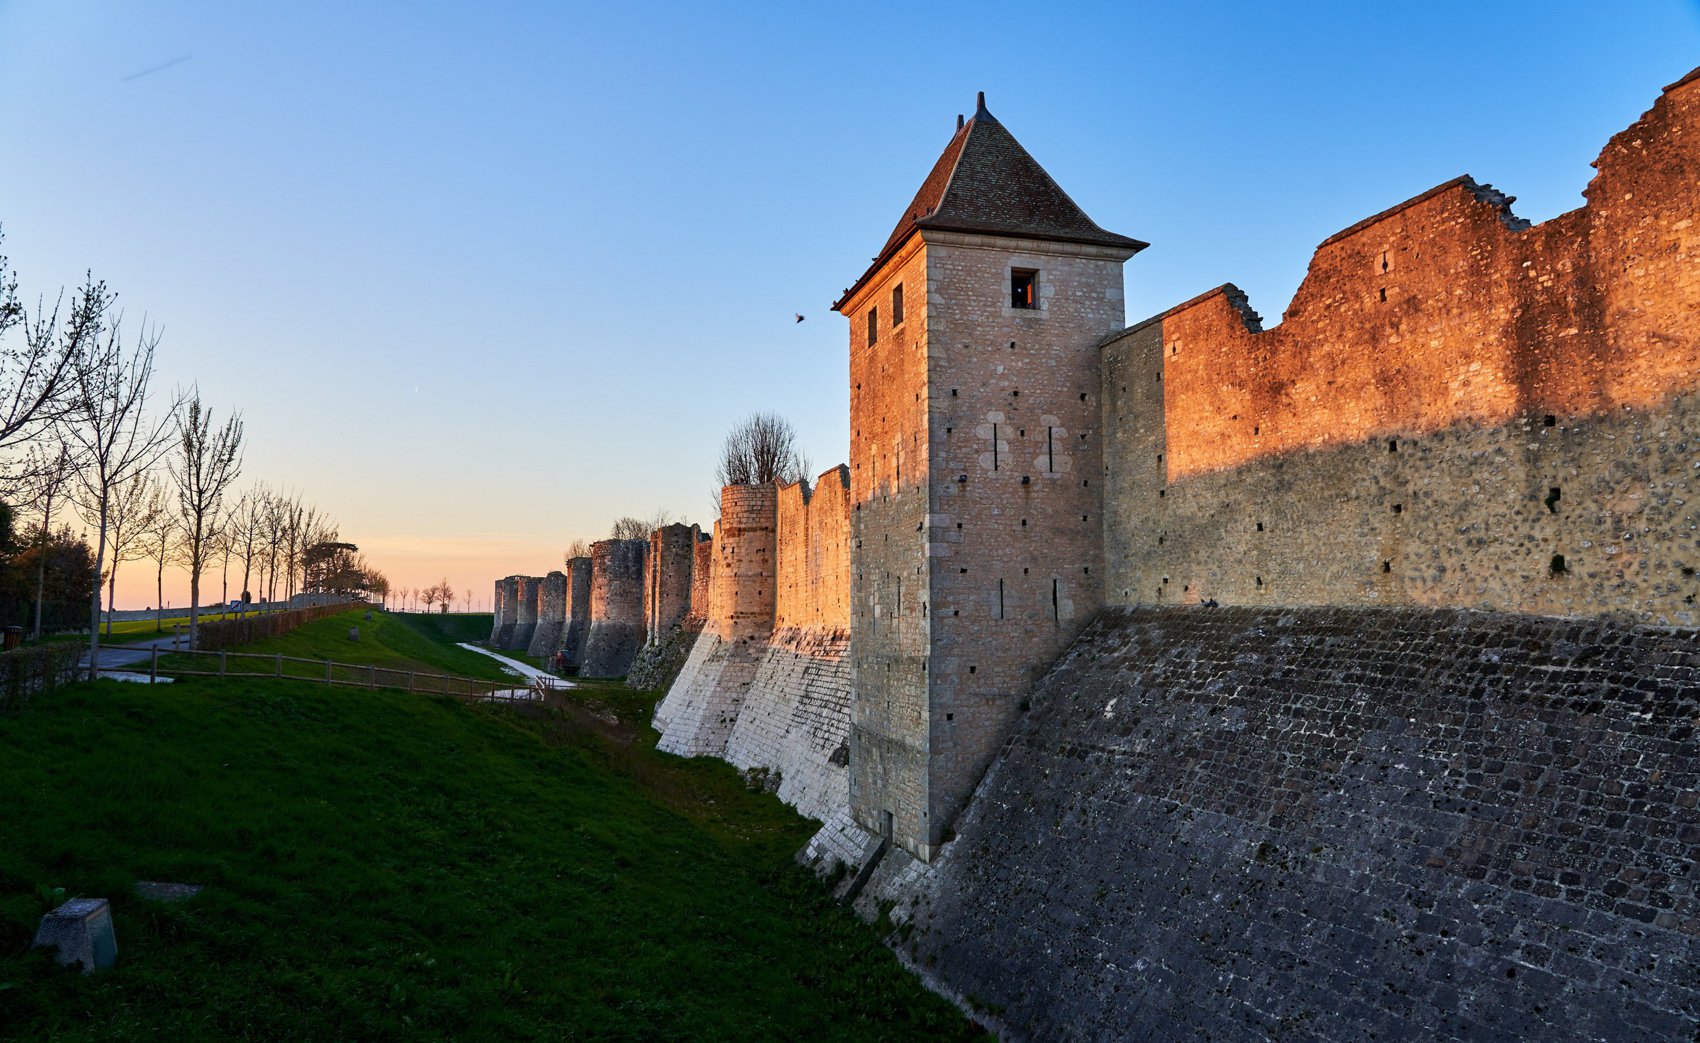 Hero Image forProvins (Medieval Walls, Flowers, Gardens, and Old Town), Spring 201903